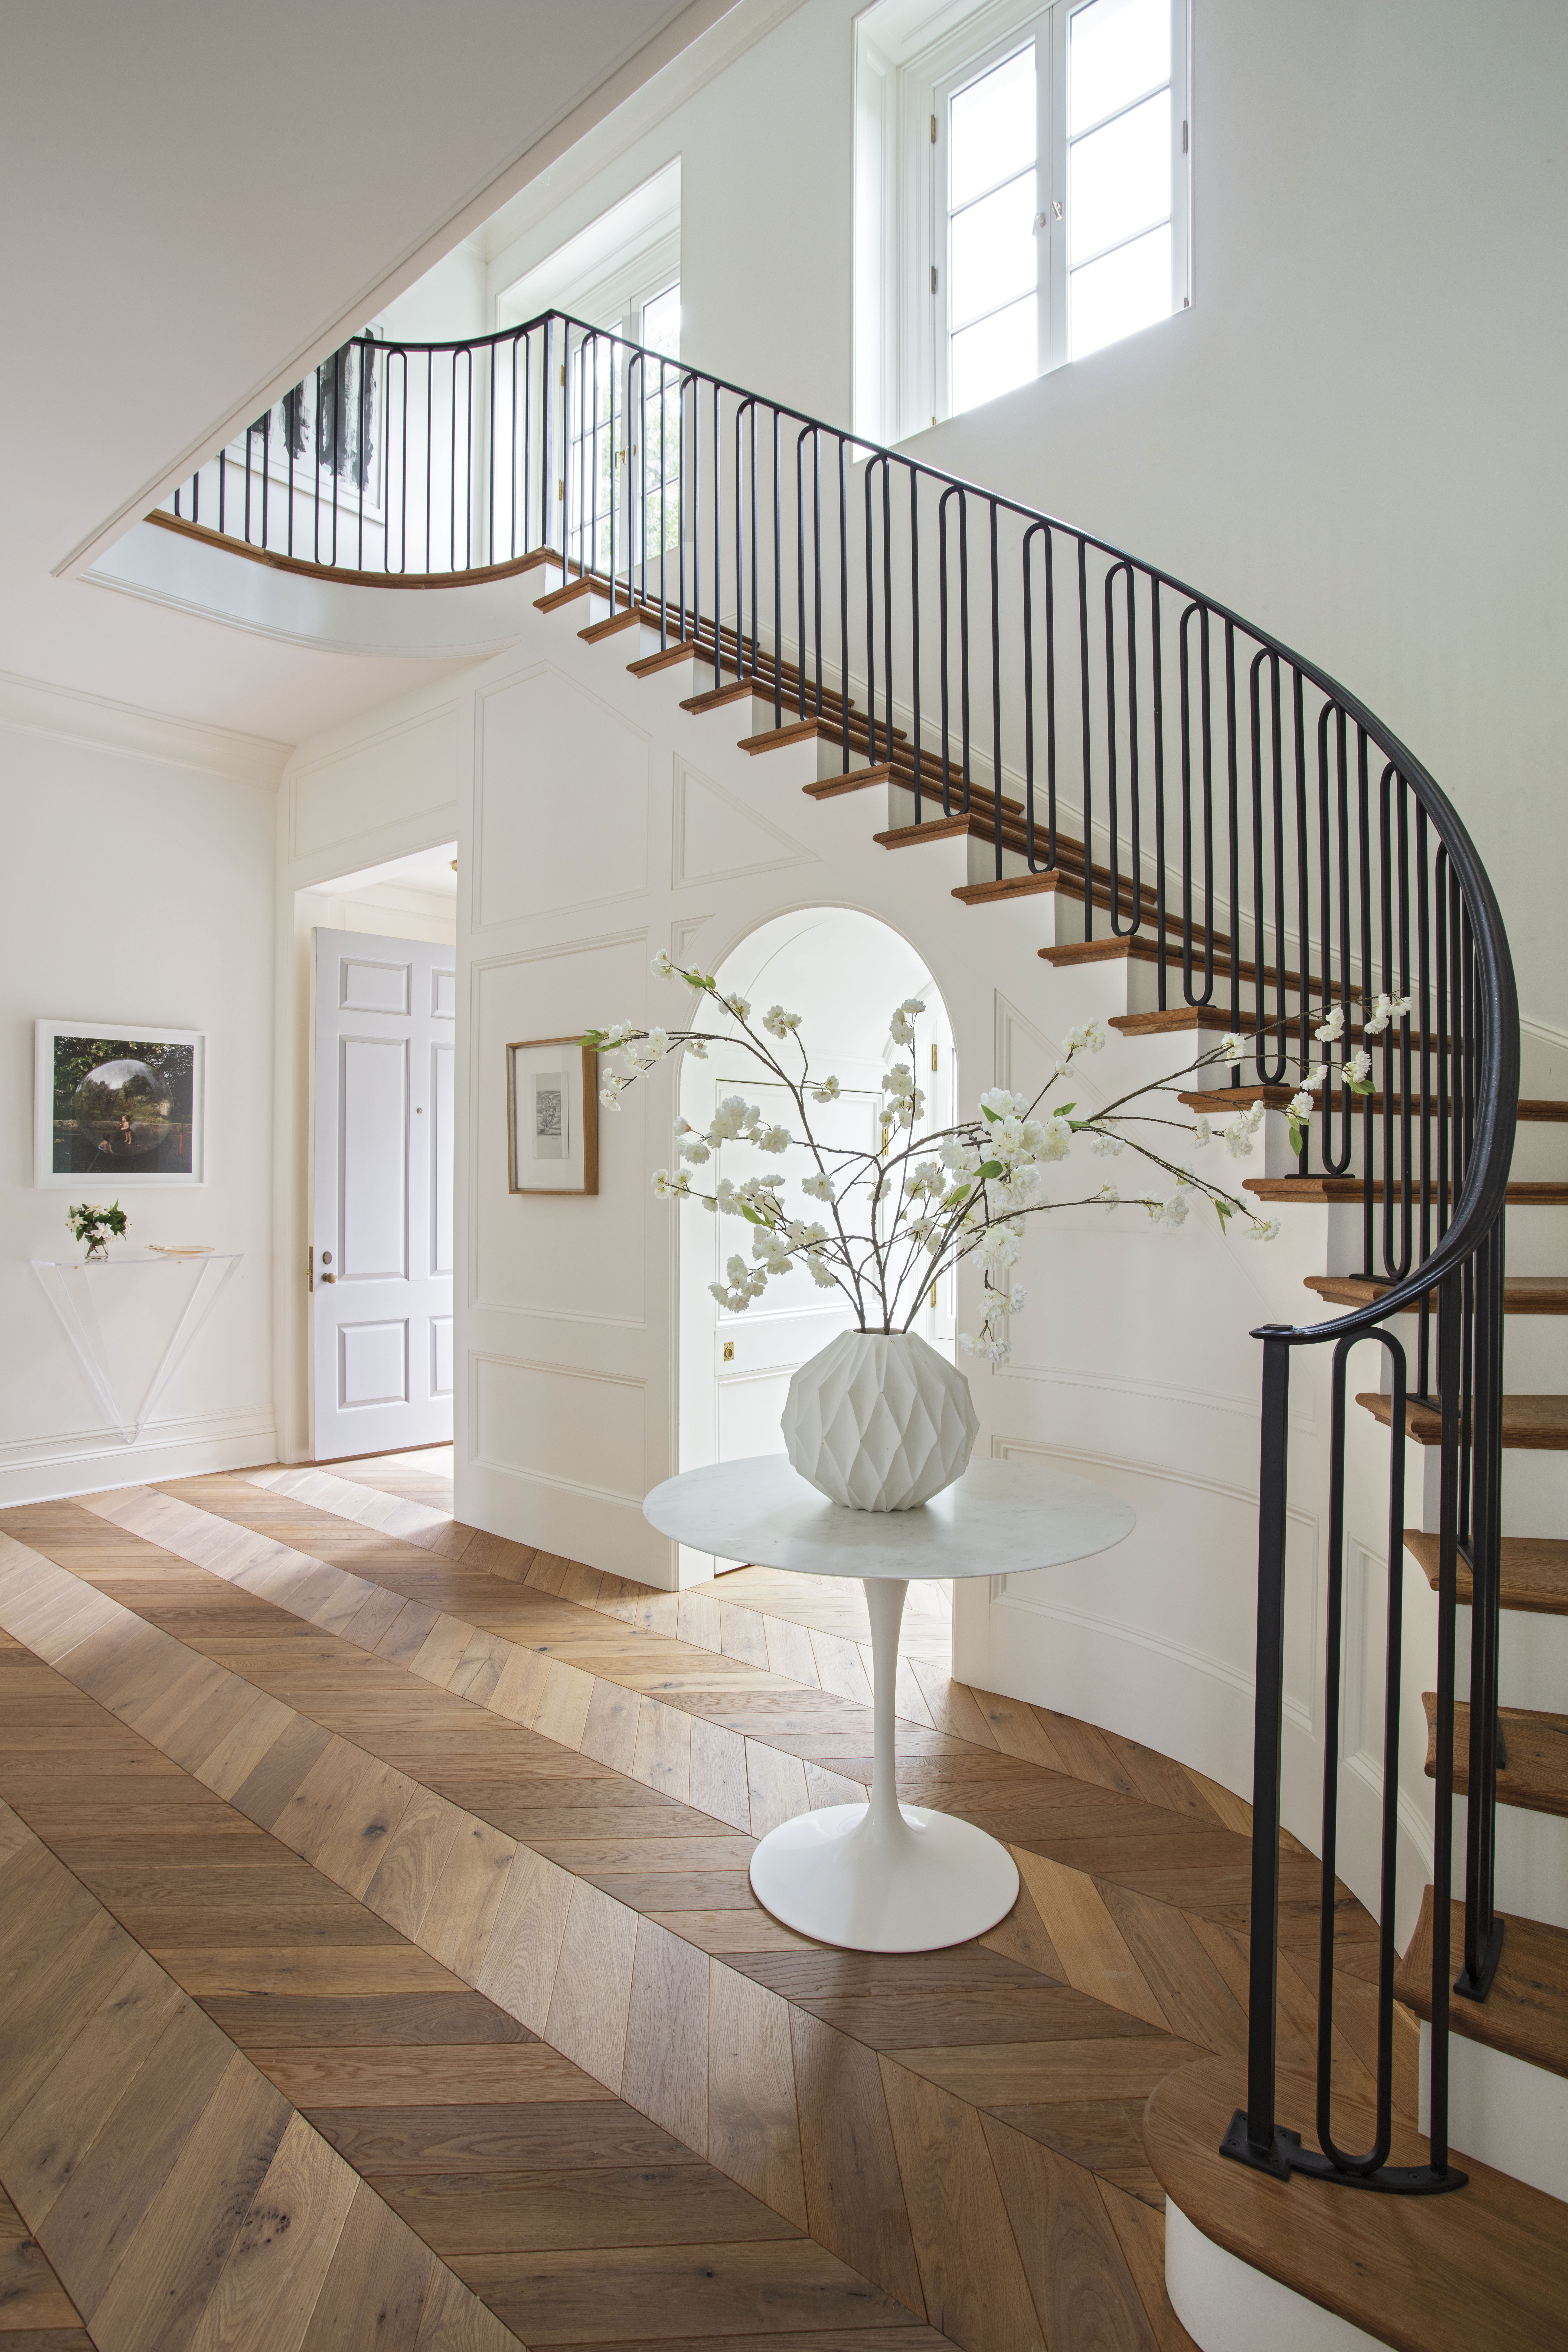 The showpiece entryway, dominated by a dramatic sweeping staircase, is flooded with natural light through a playful arched alcove and accented by white oak chevron flooring.